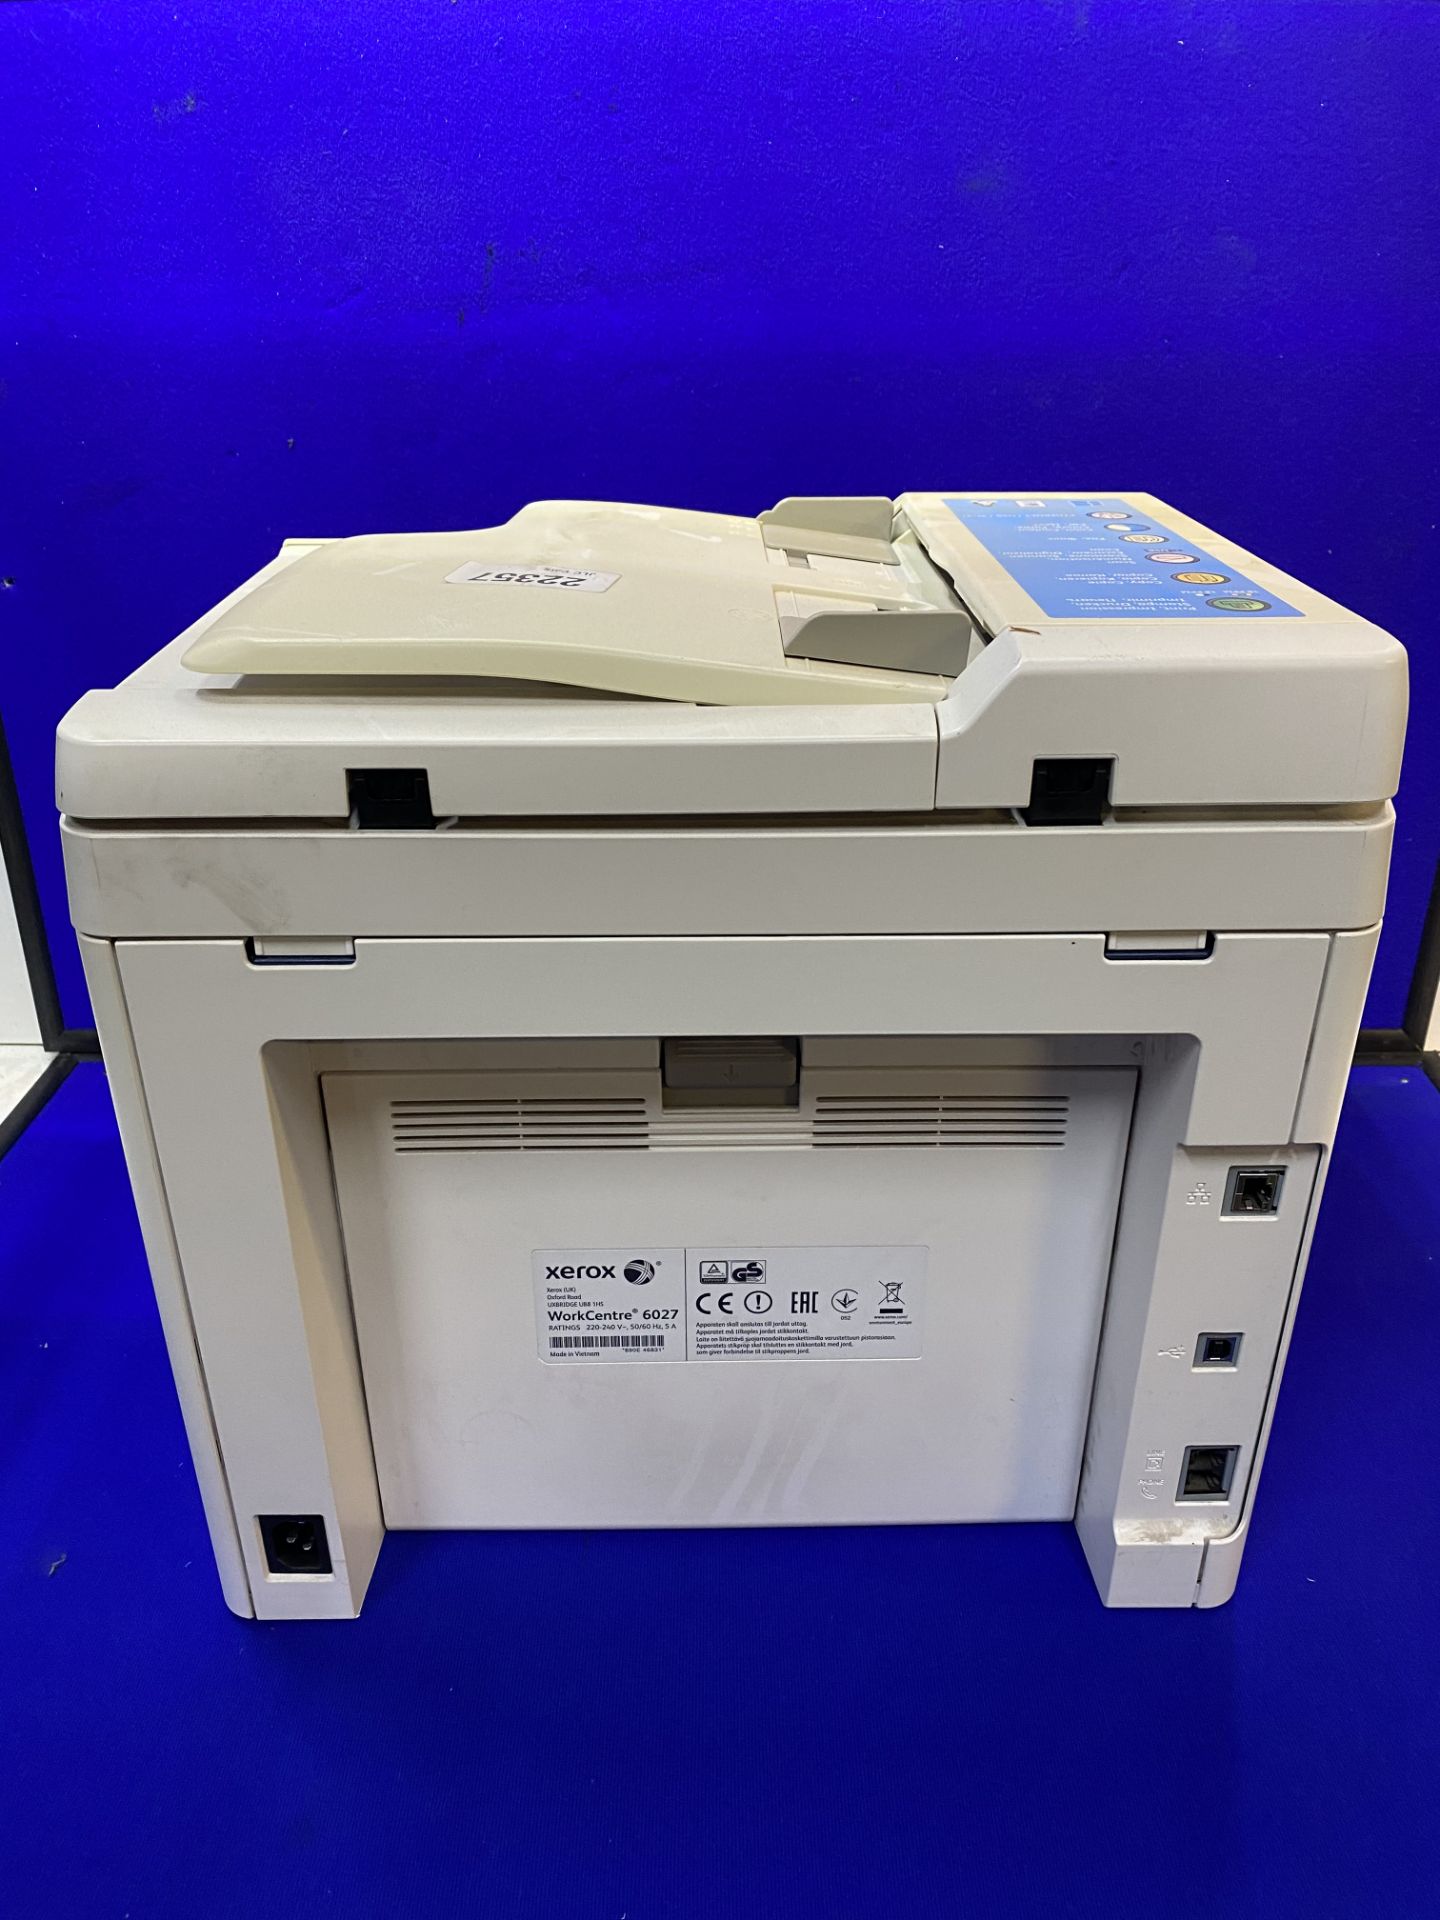 Xerox WorkCentre 6027 A4 Colour Multifunction Laser Printer - Image 16 of 22